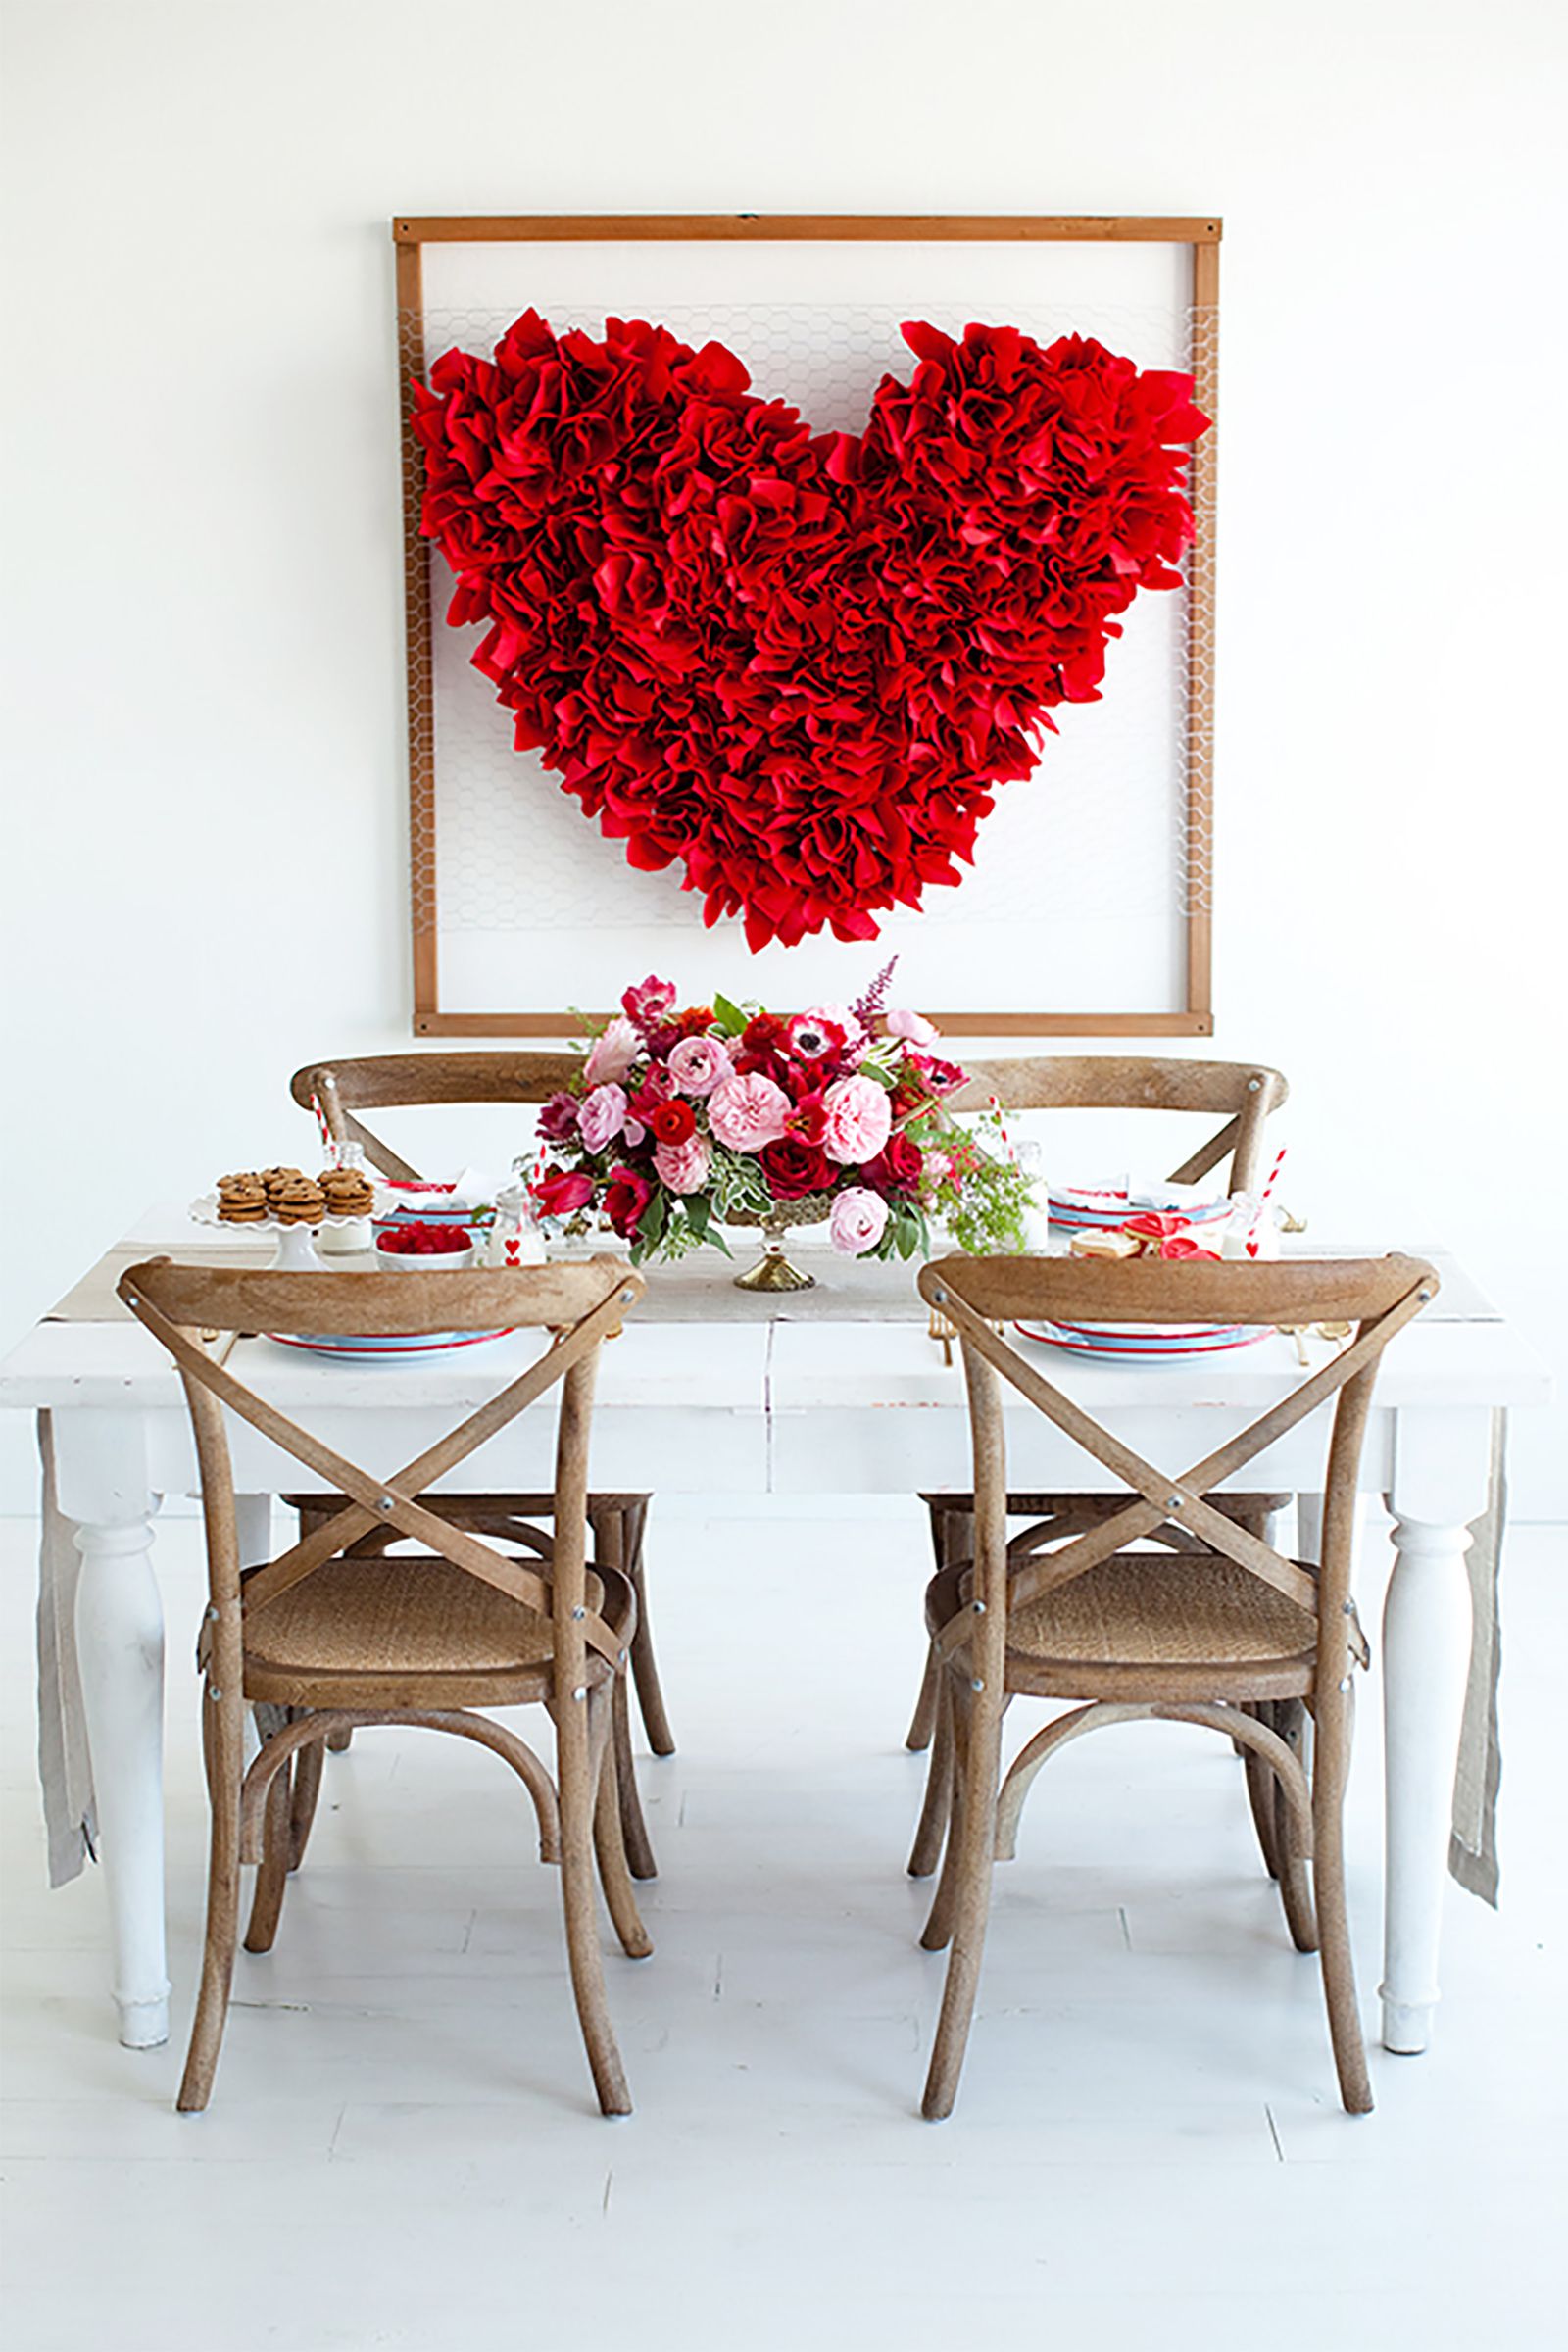 Plan the Perfect Valentine's Day Dinner W/ These Fancy Table Settings